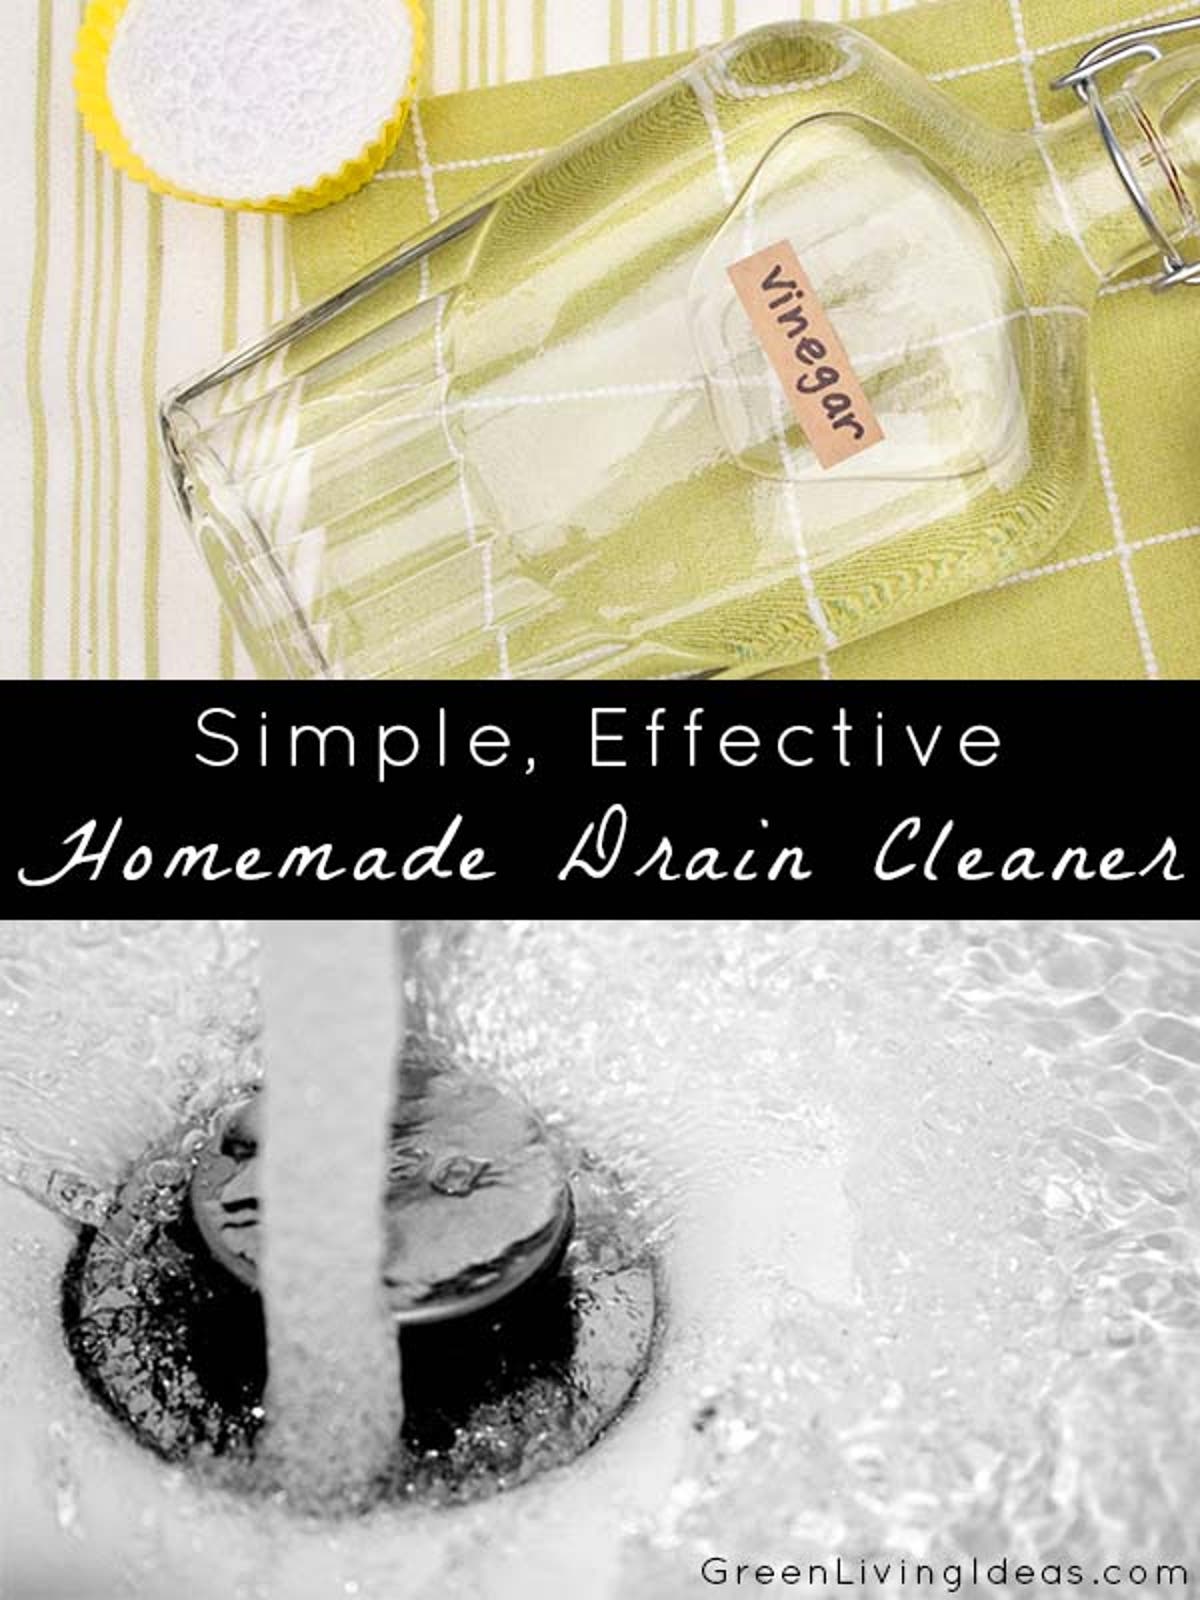 Homemade Drain Cleaner ?fit=600%2C800&ssl=1&width=1200&enable=upscale